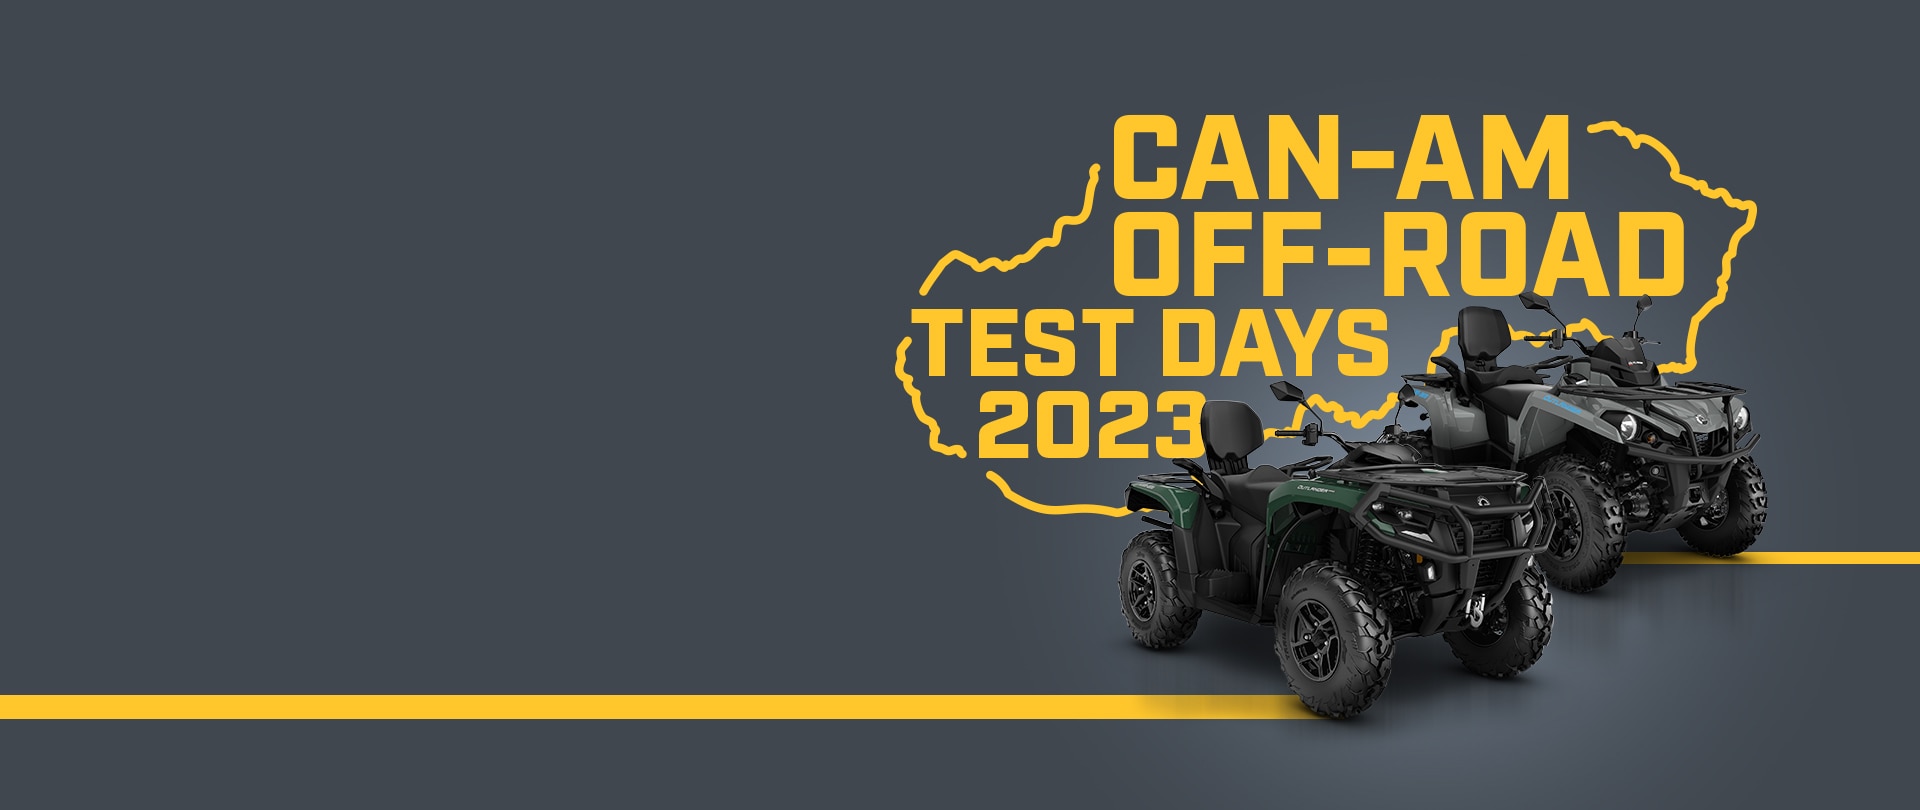 ﻿CAN-AM OFF-ROAD TEST DAYS 2023